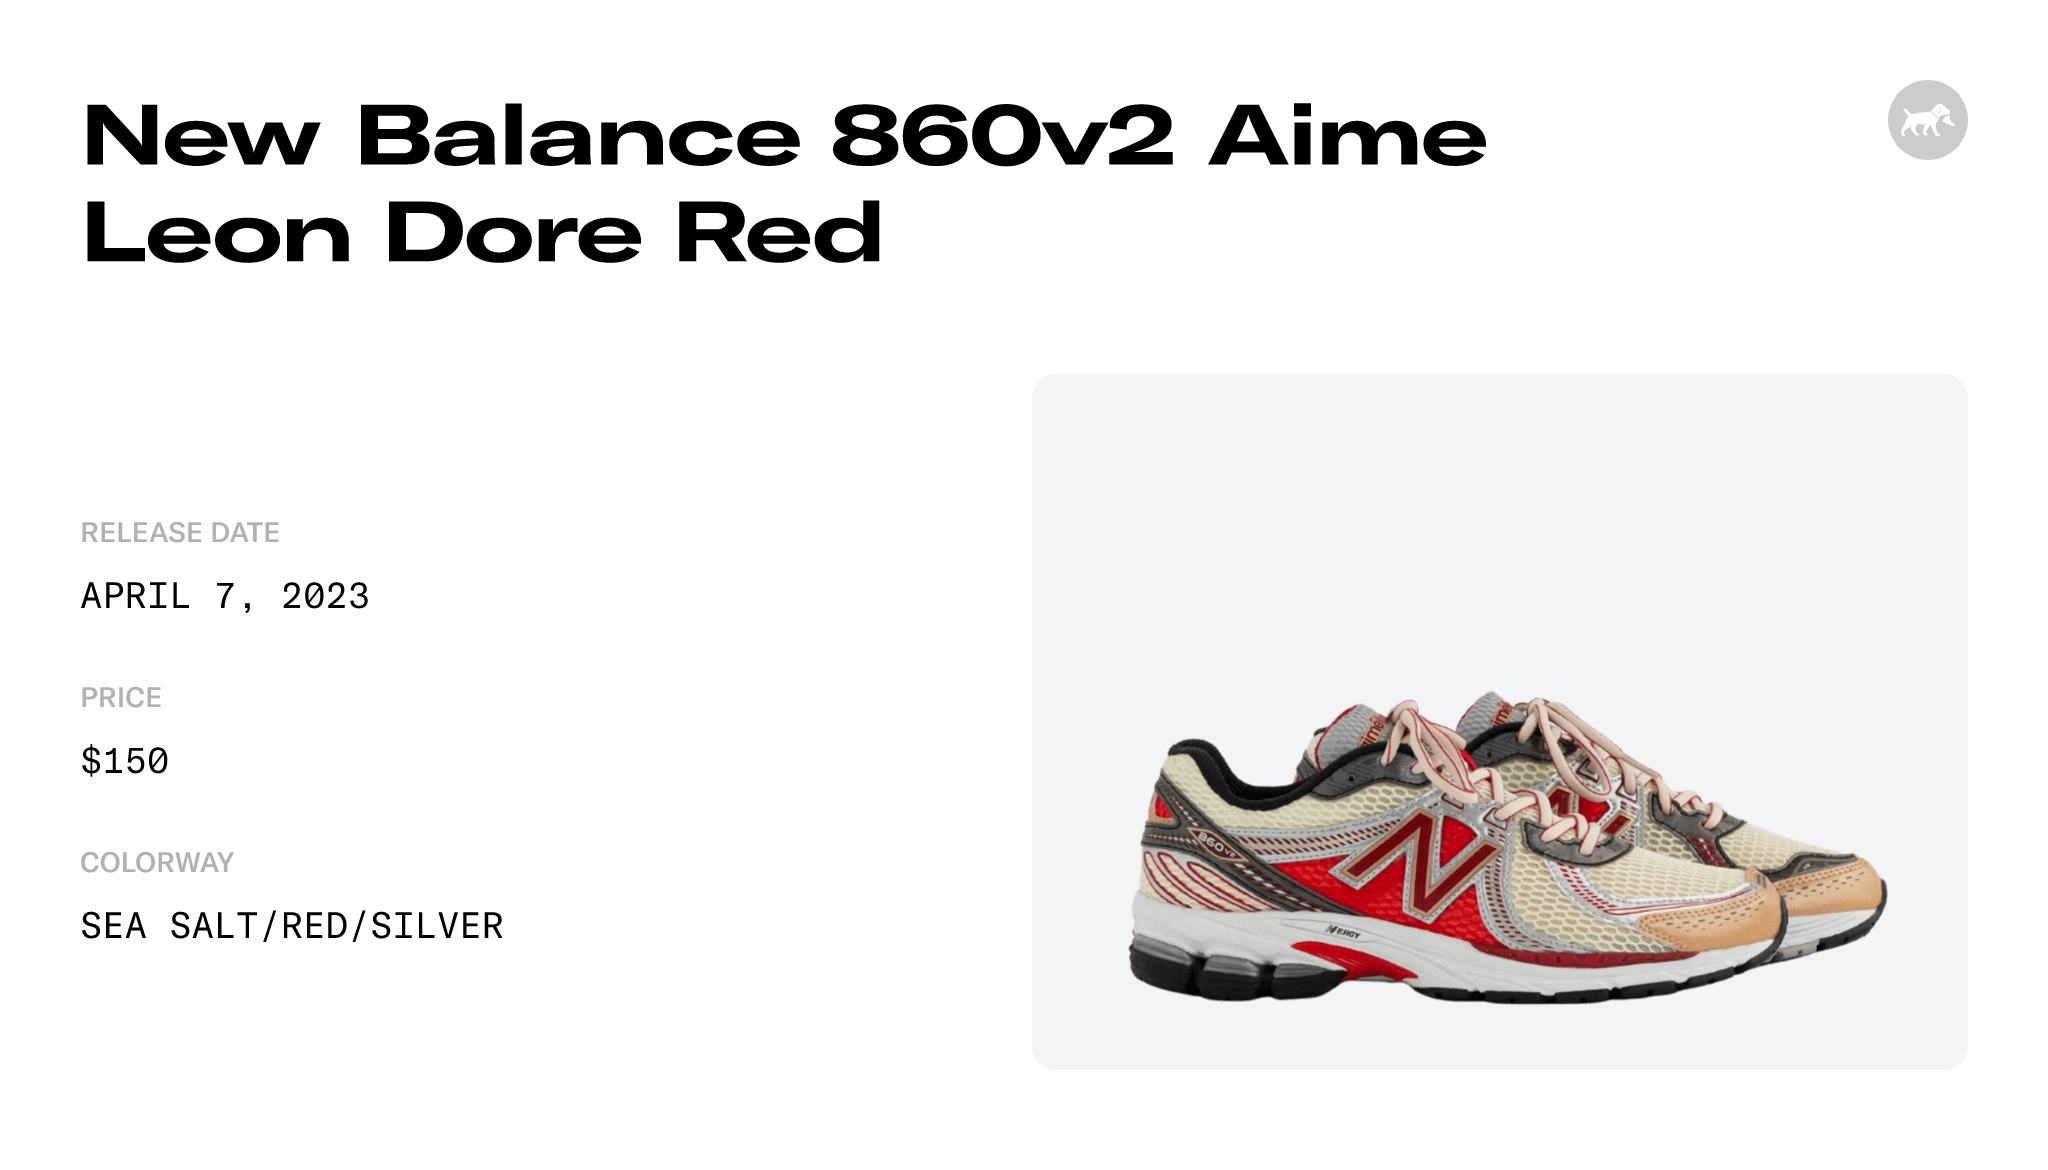 New Balance 860v2 Aime Leon Dore Red Raffles and Release Date